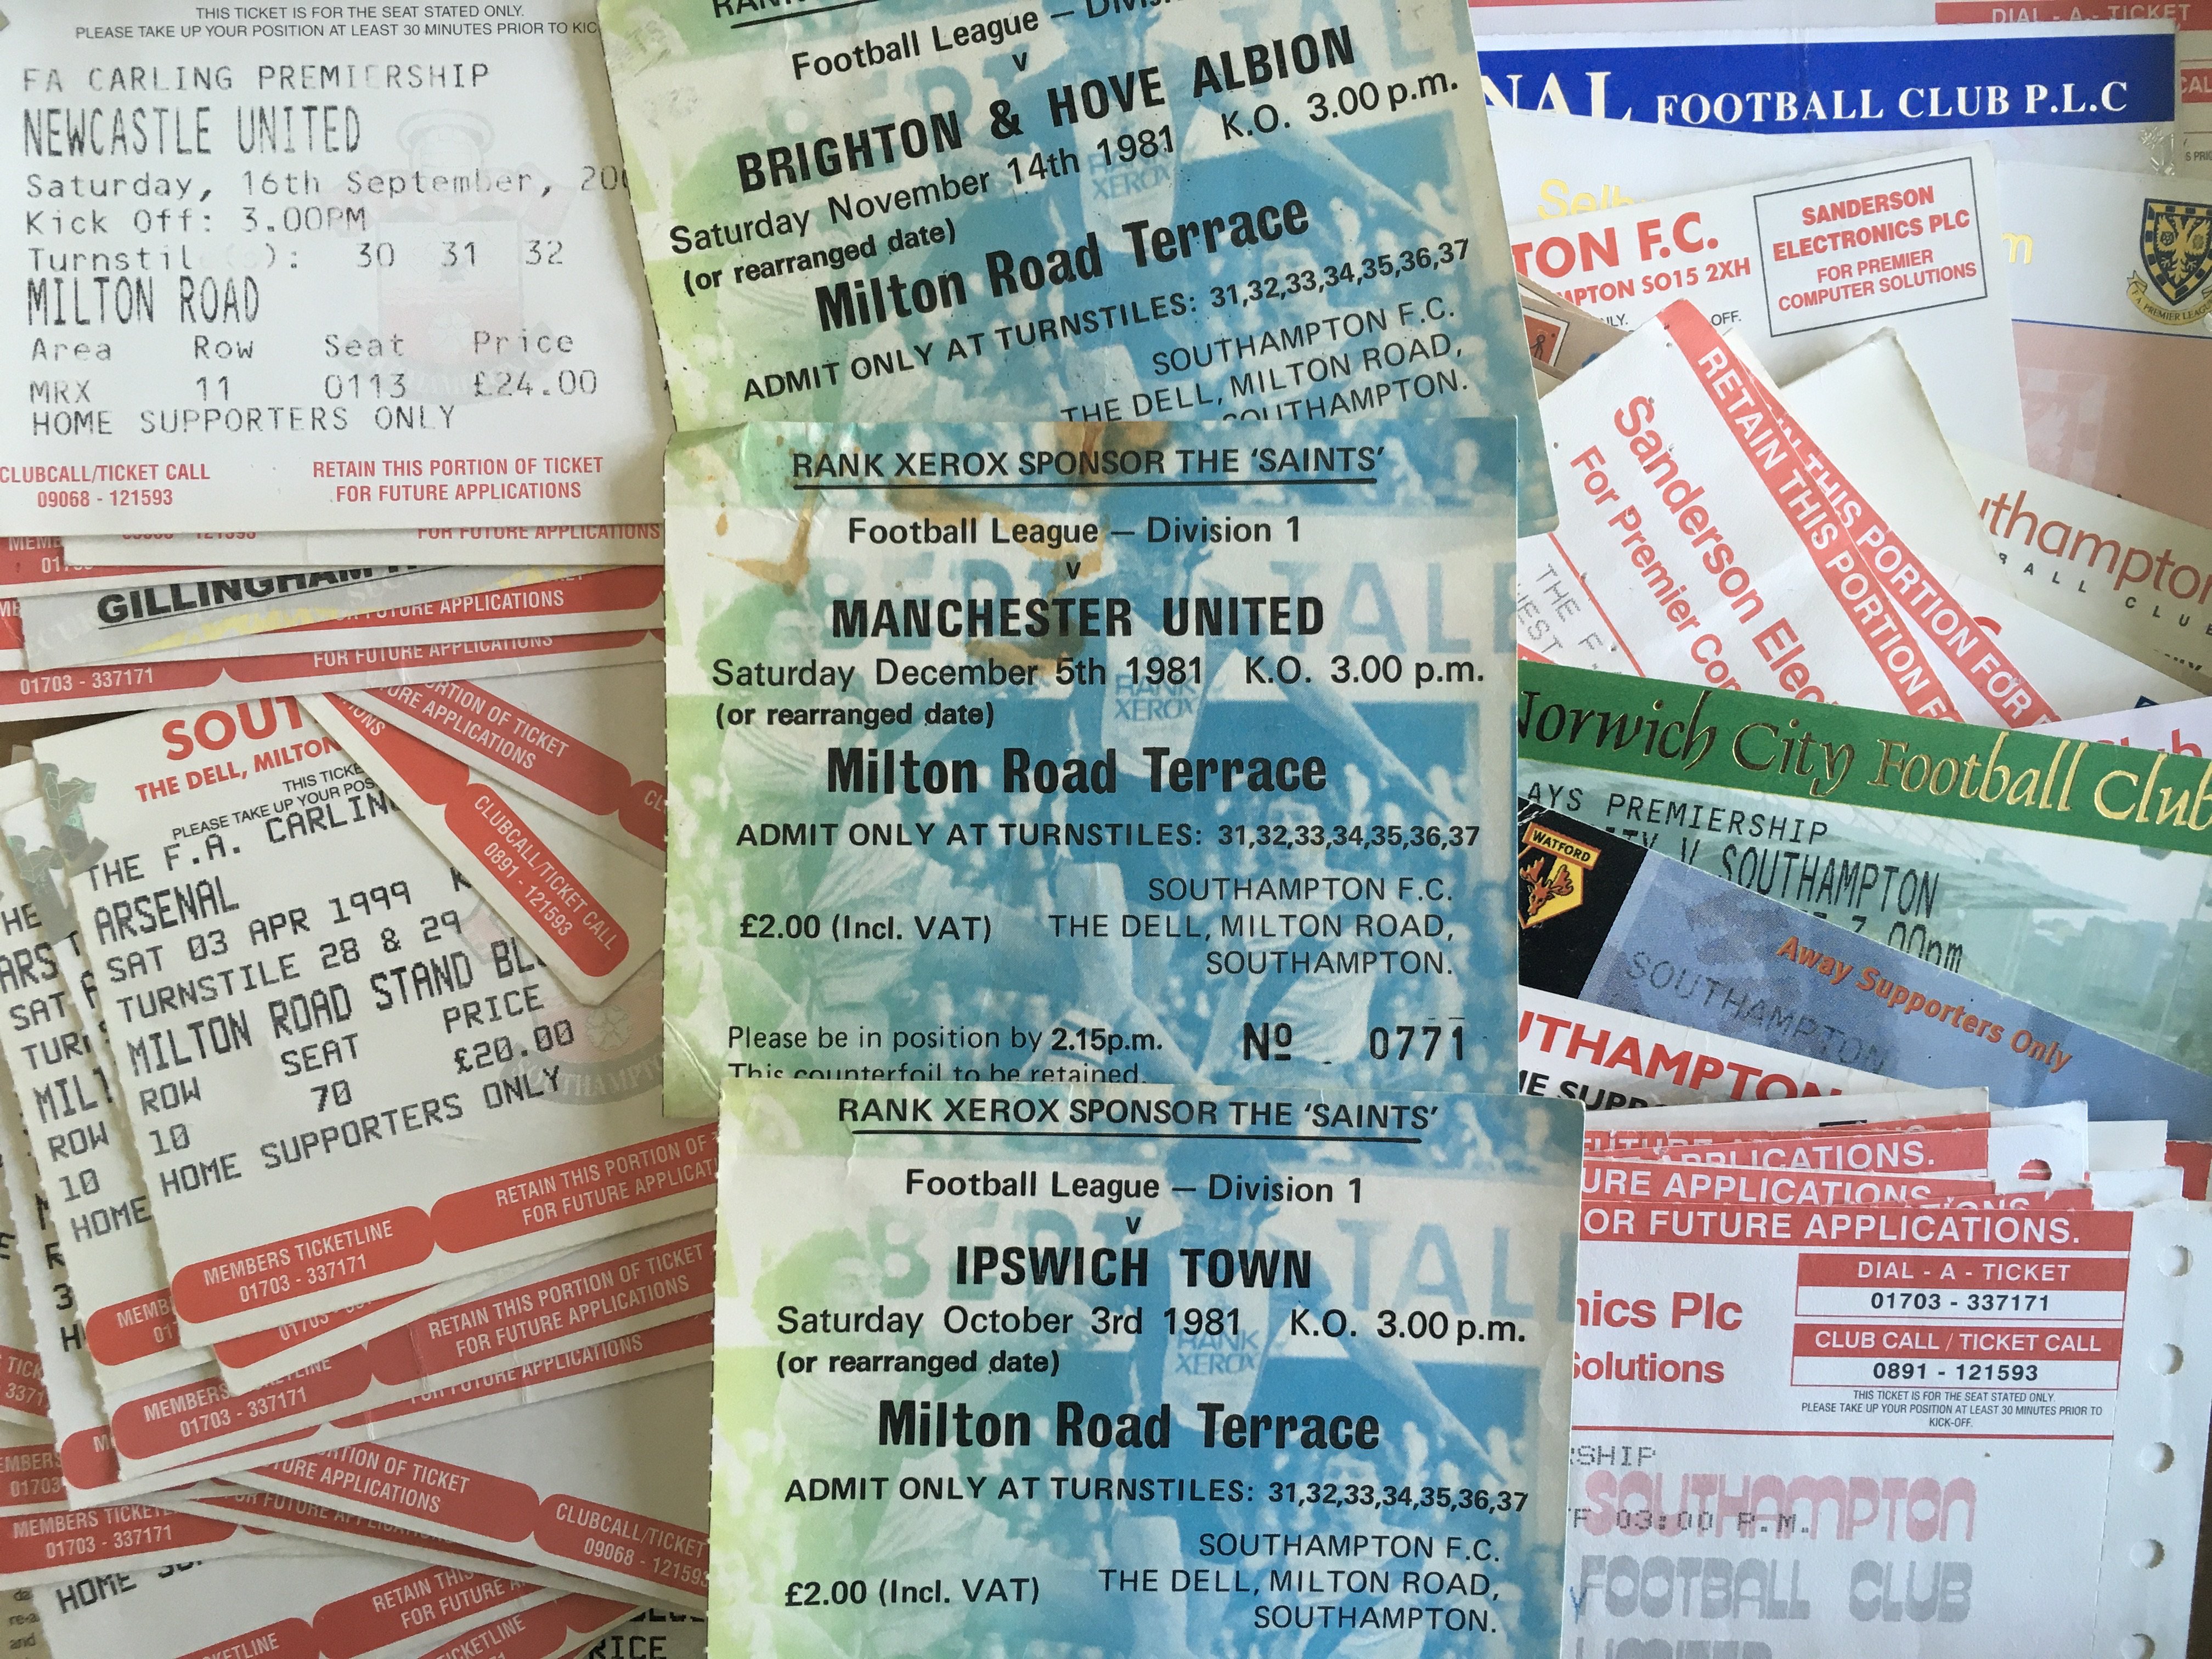 Southampton Football Tickets: Majority 1990s home tickets with some duplication but some aways and